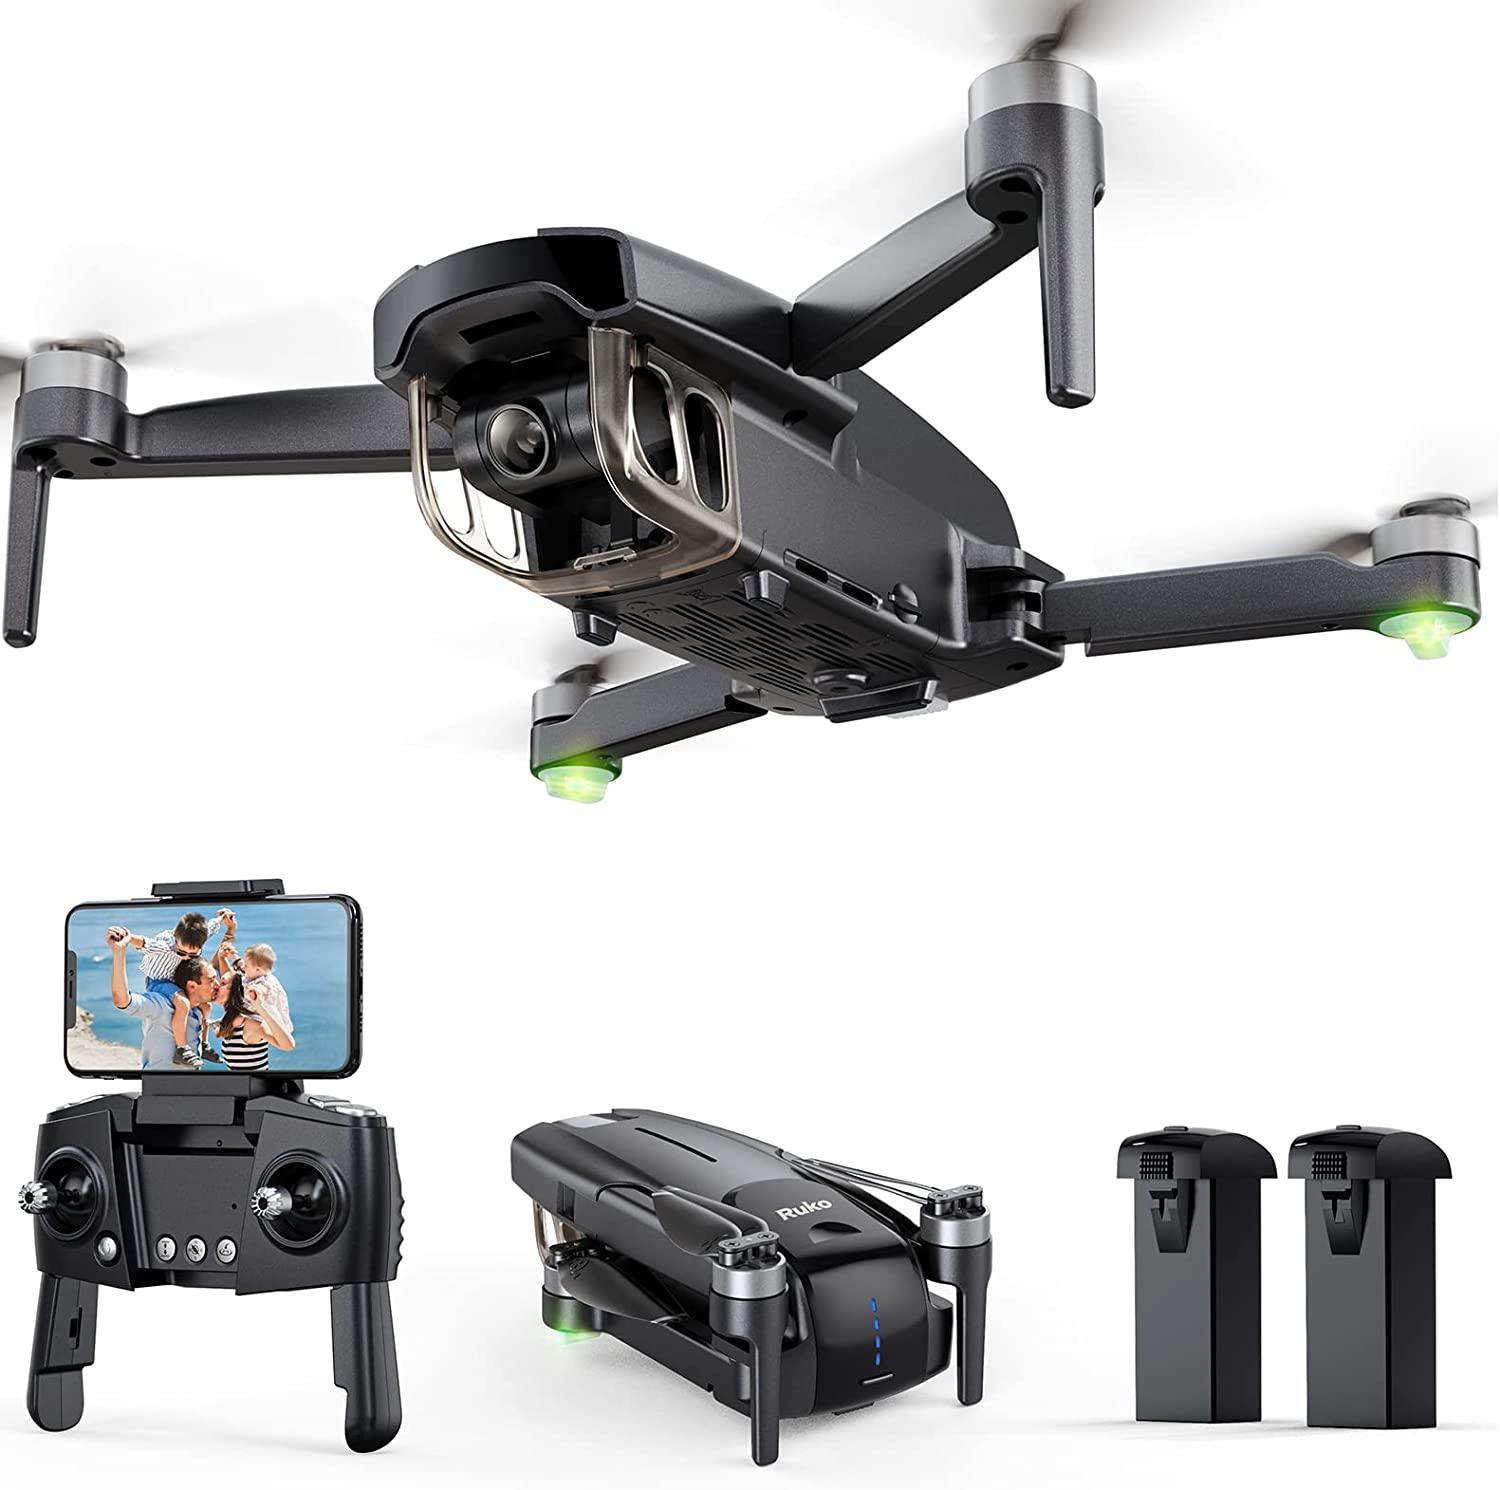  DJI Mini SE, Drone Quadcopter with 3-Axis Gimbal, 2.7K Camera,  GPS, 30 Mins Flight Time, Reduced Weight, Less Than 249g, Improved Scale 5  Wind Resistance, Return to Home, for Drone Beginners